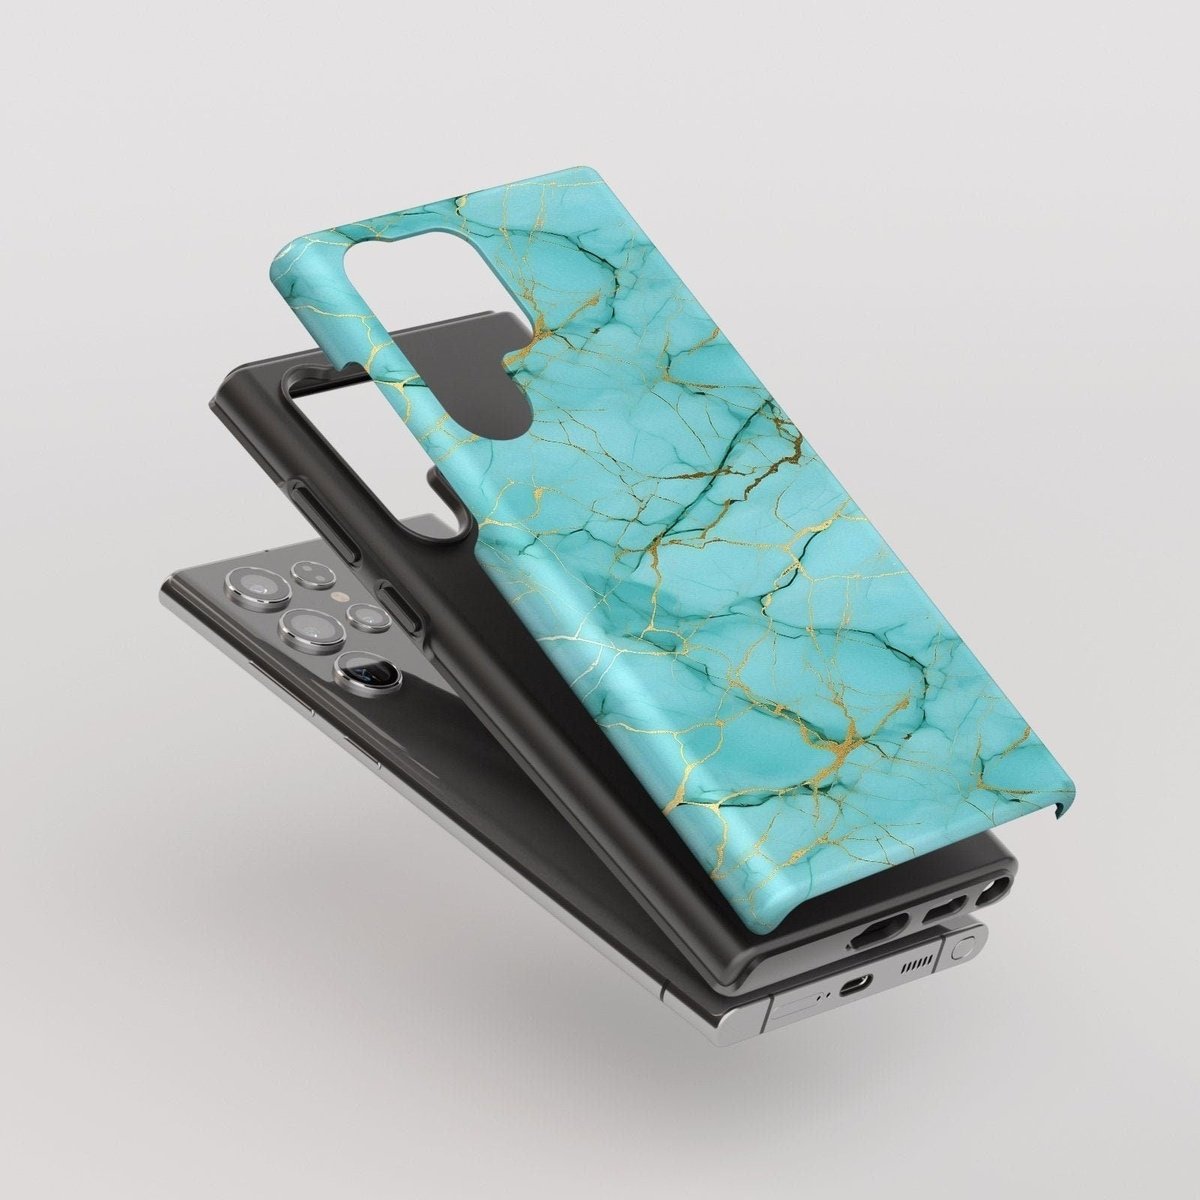 Echoes of Marble Splendor - Samsung Case, Galaxy S24, S23, S22, Plus, Ultra - tousphone